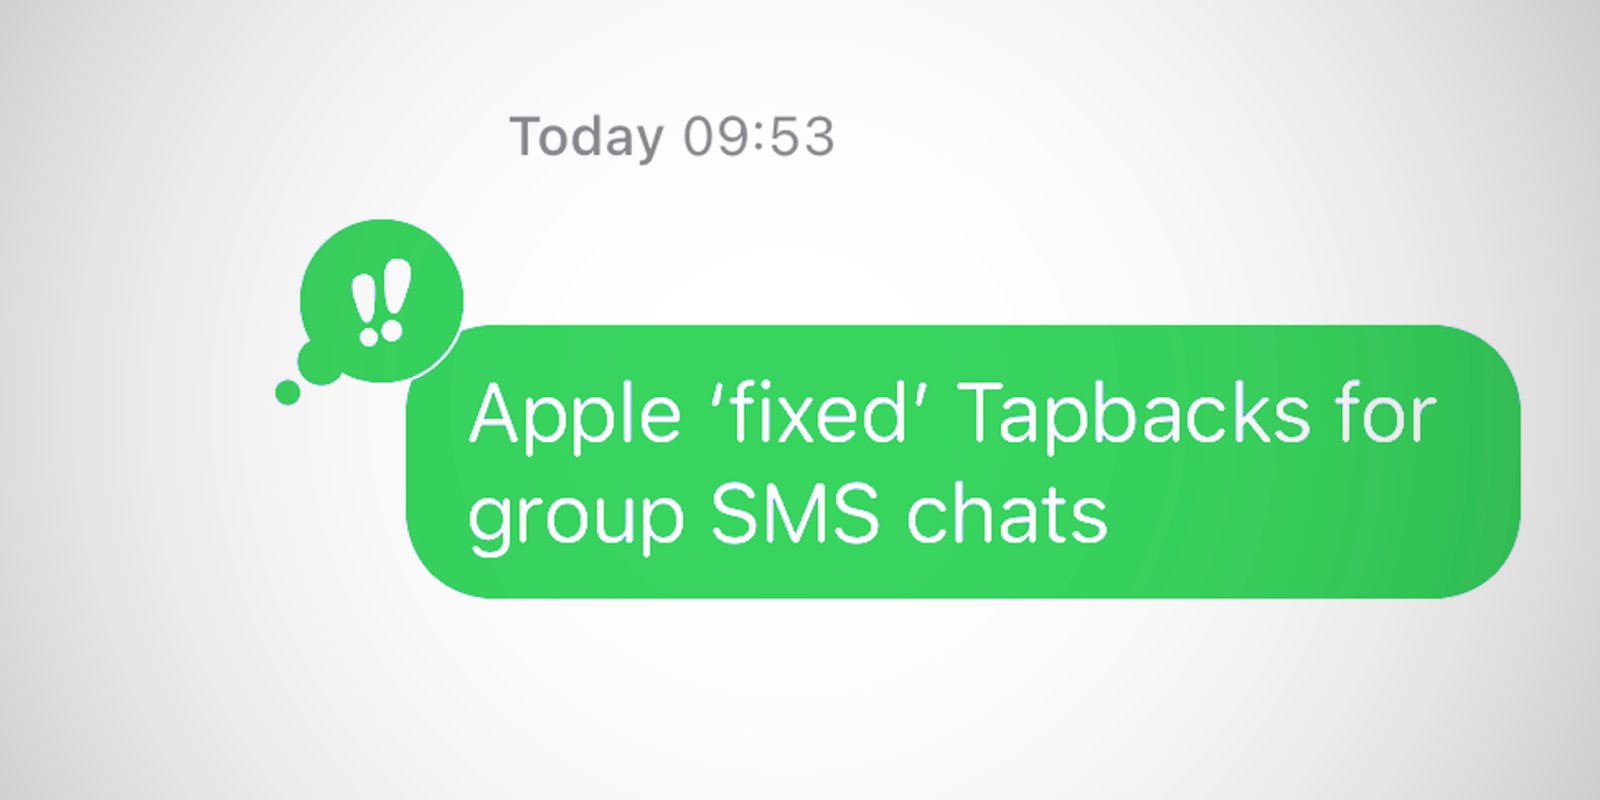 Tapbacks in iMessages for SMS